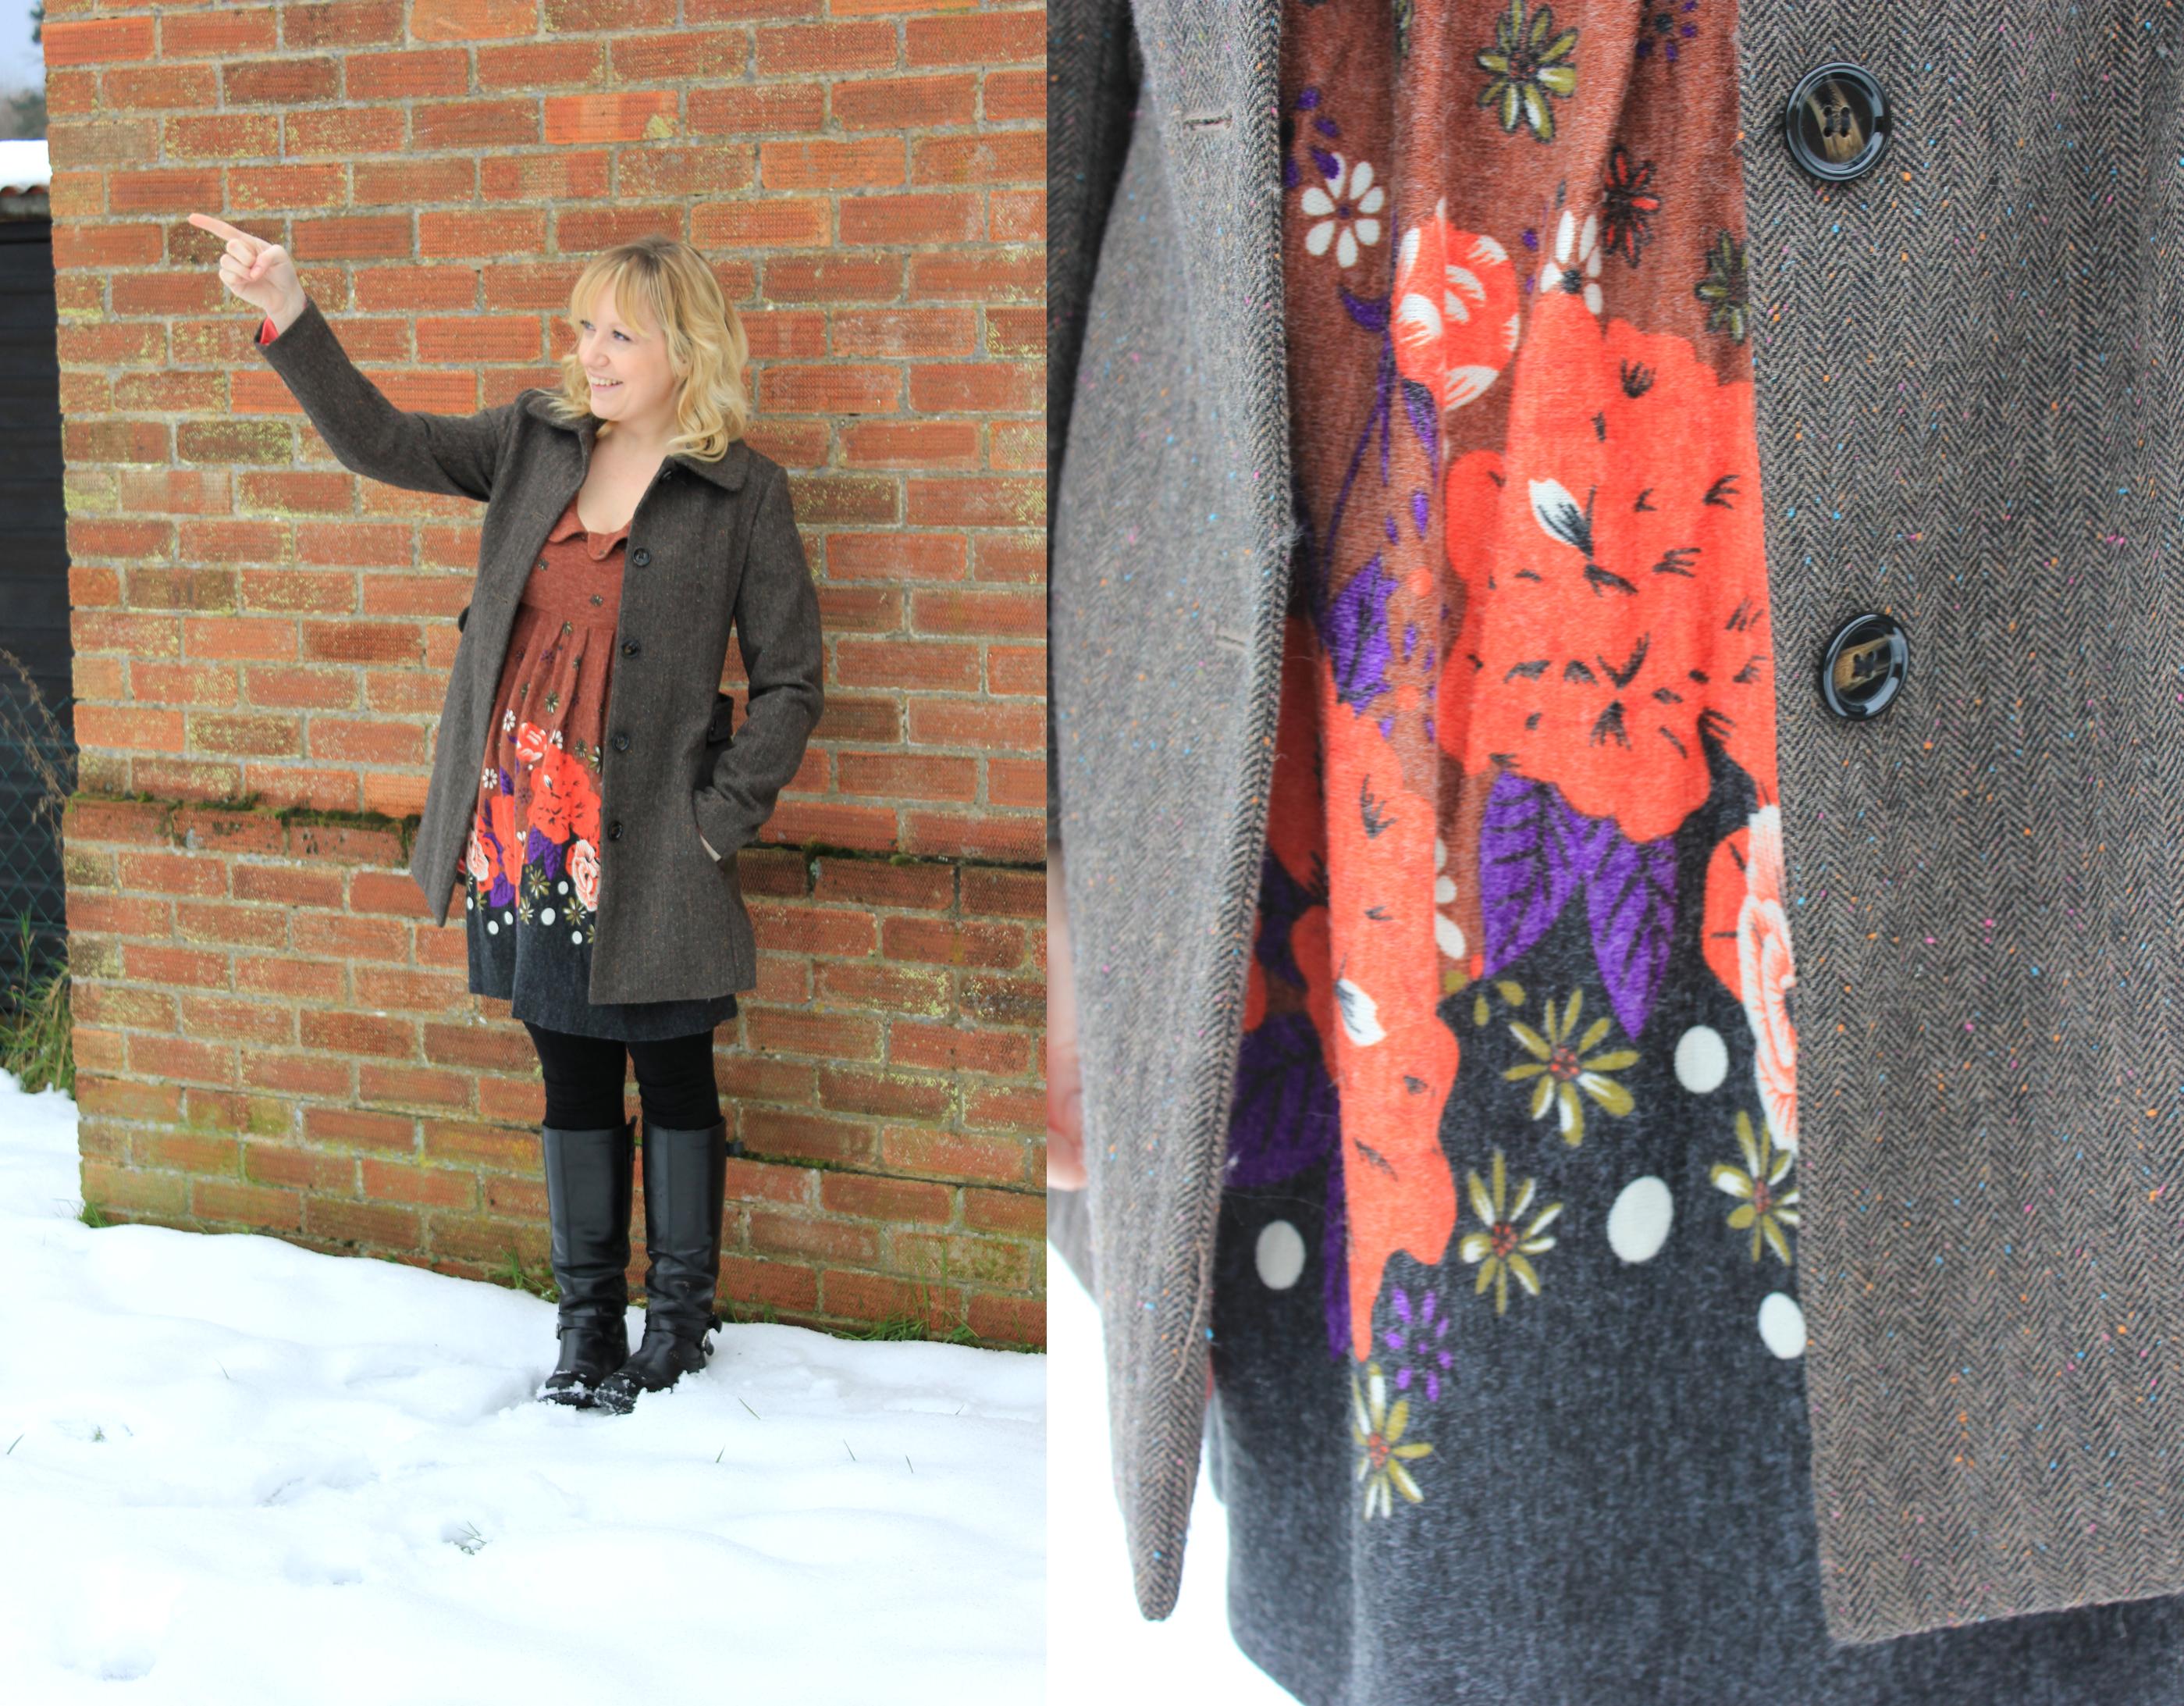 apricot january sale steals dress bargains cuppa tea in the garden snow detail